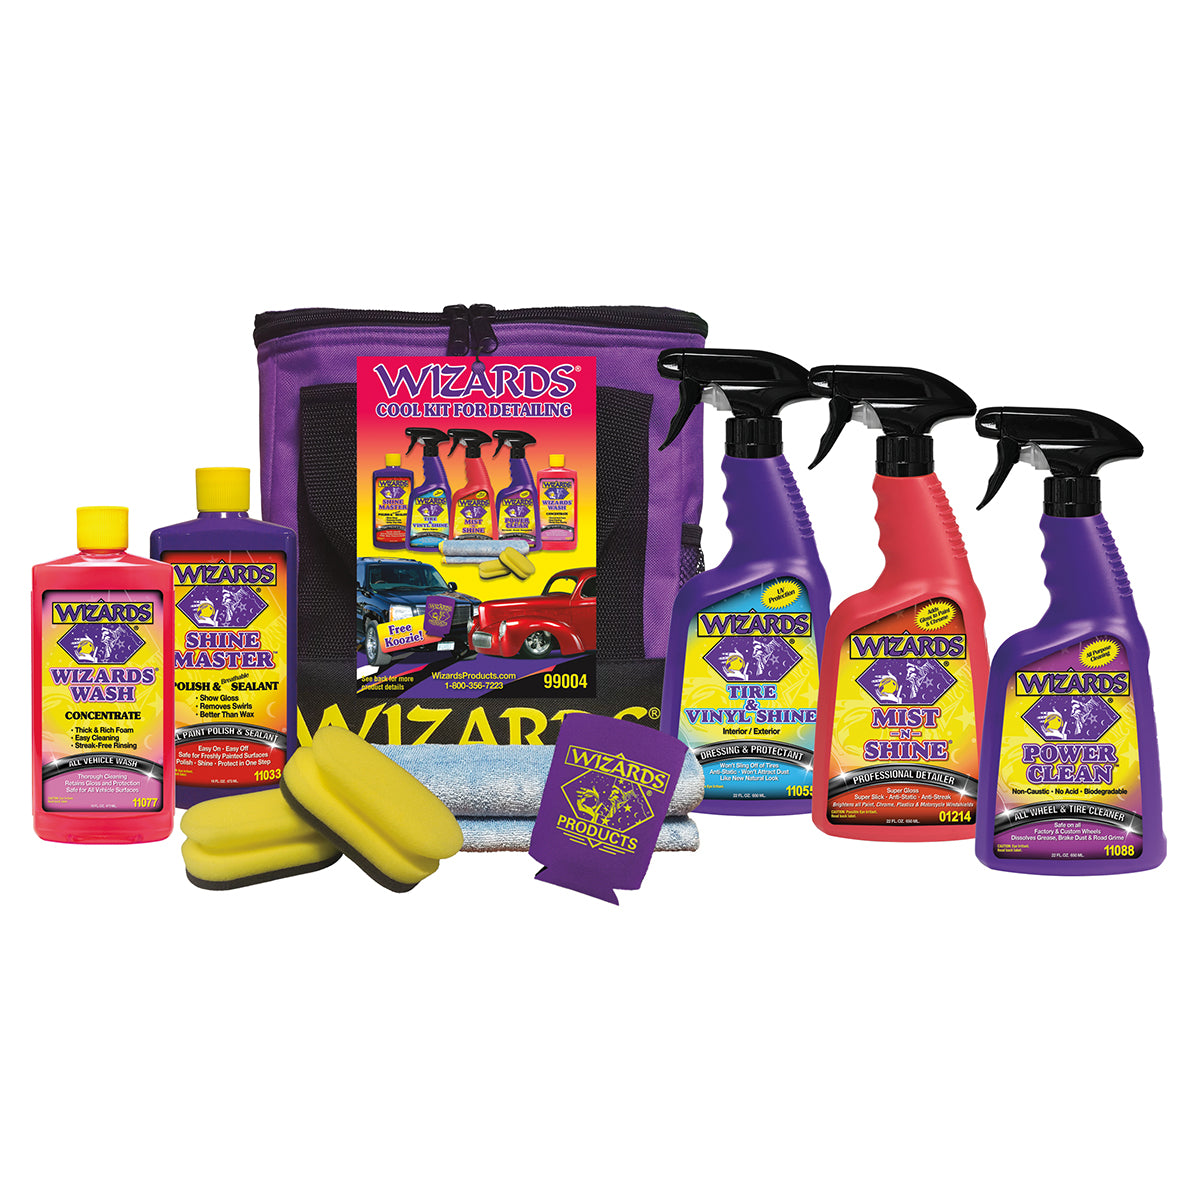 Wizards Motorcycle Cleaner Kits - 8 Piece Motorcycle Cool Kit